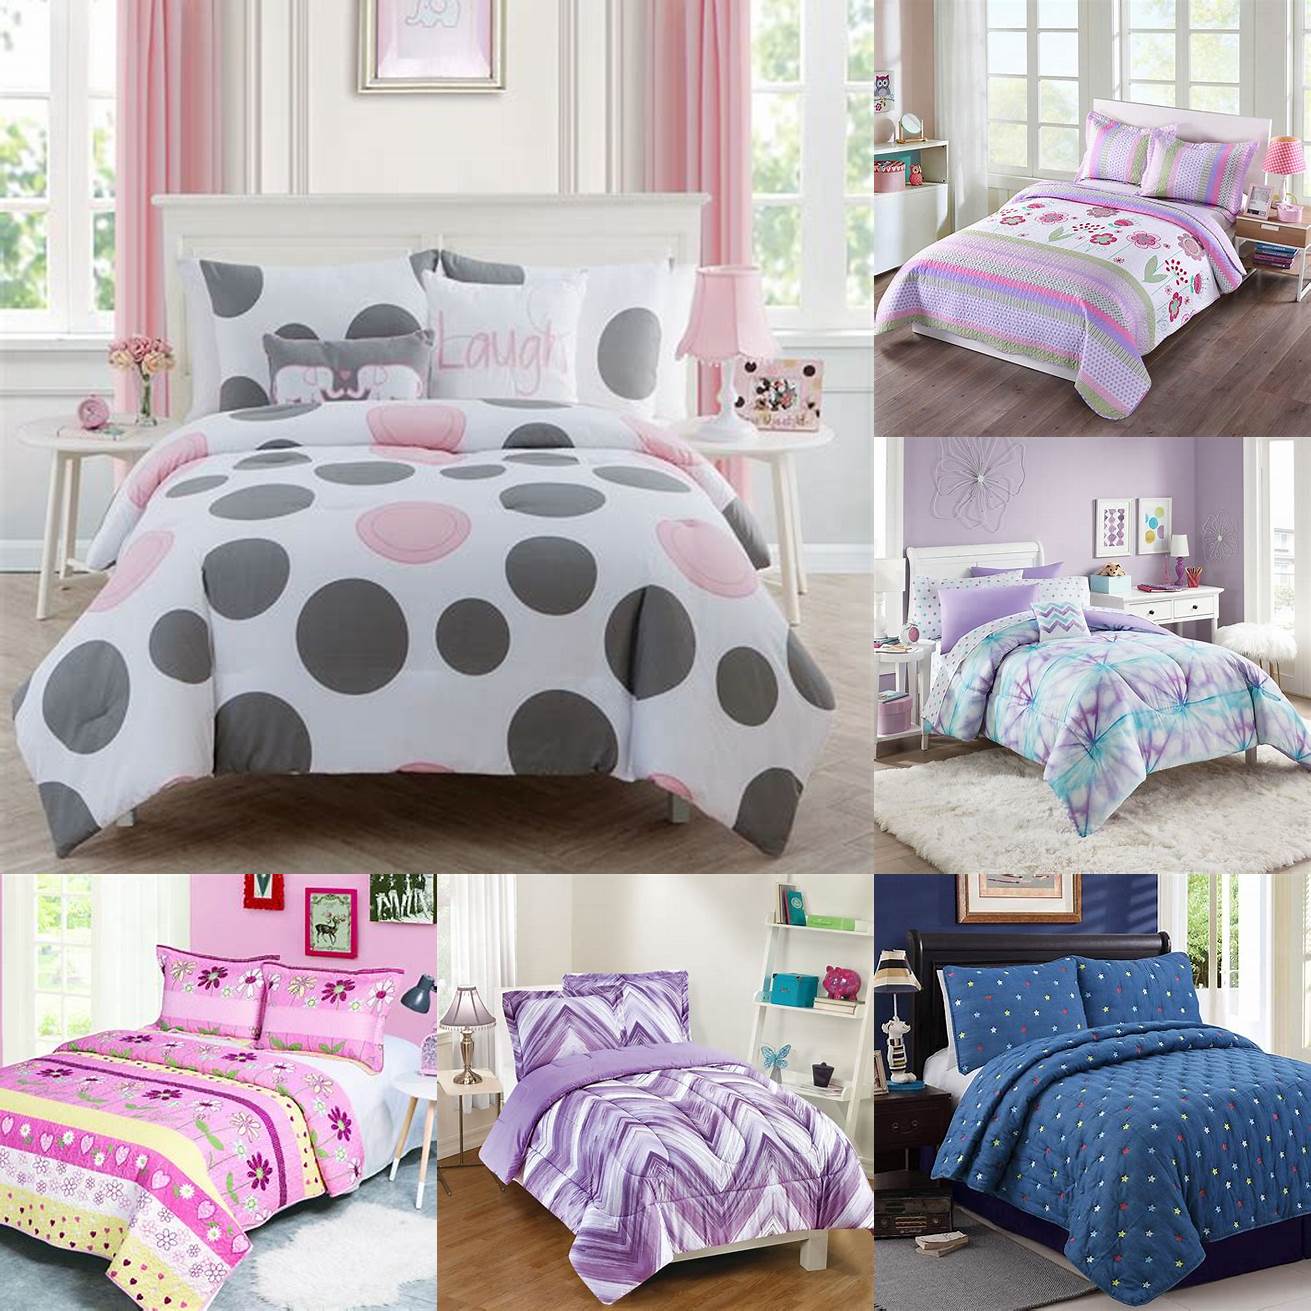 6 Full size kids bed with colorful bedding